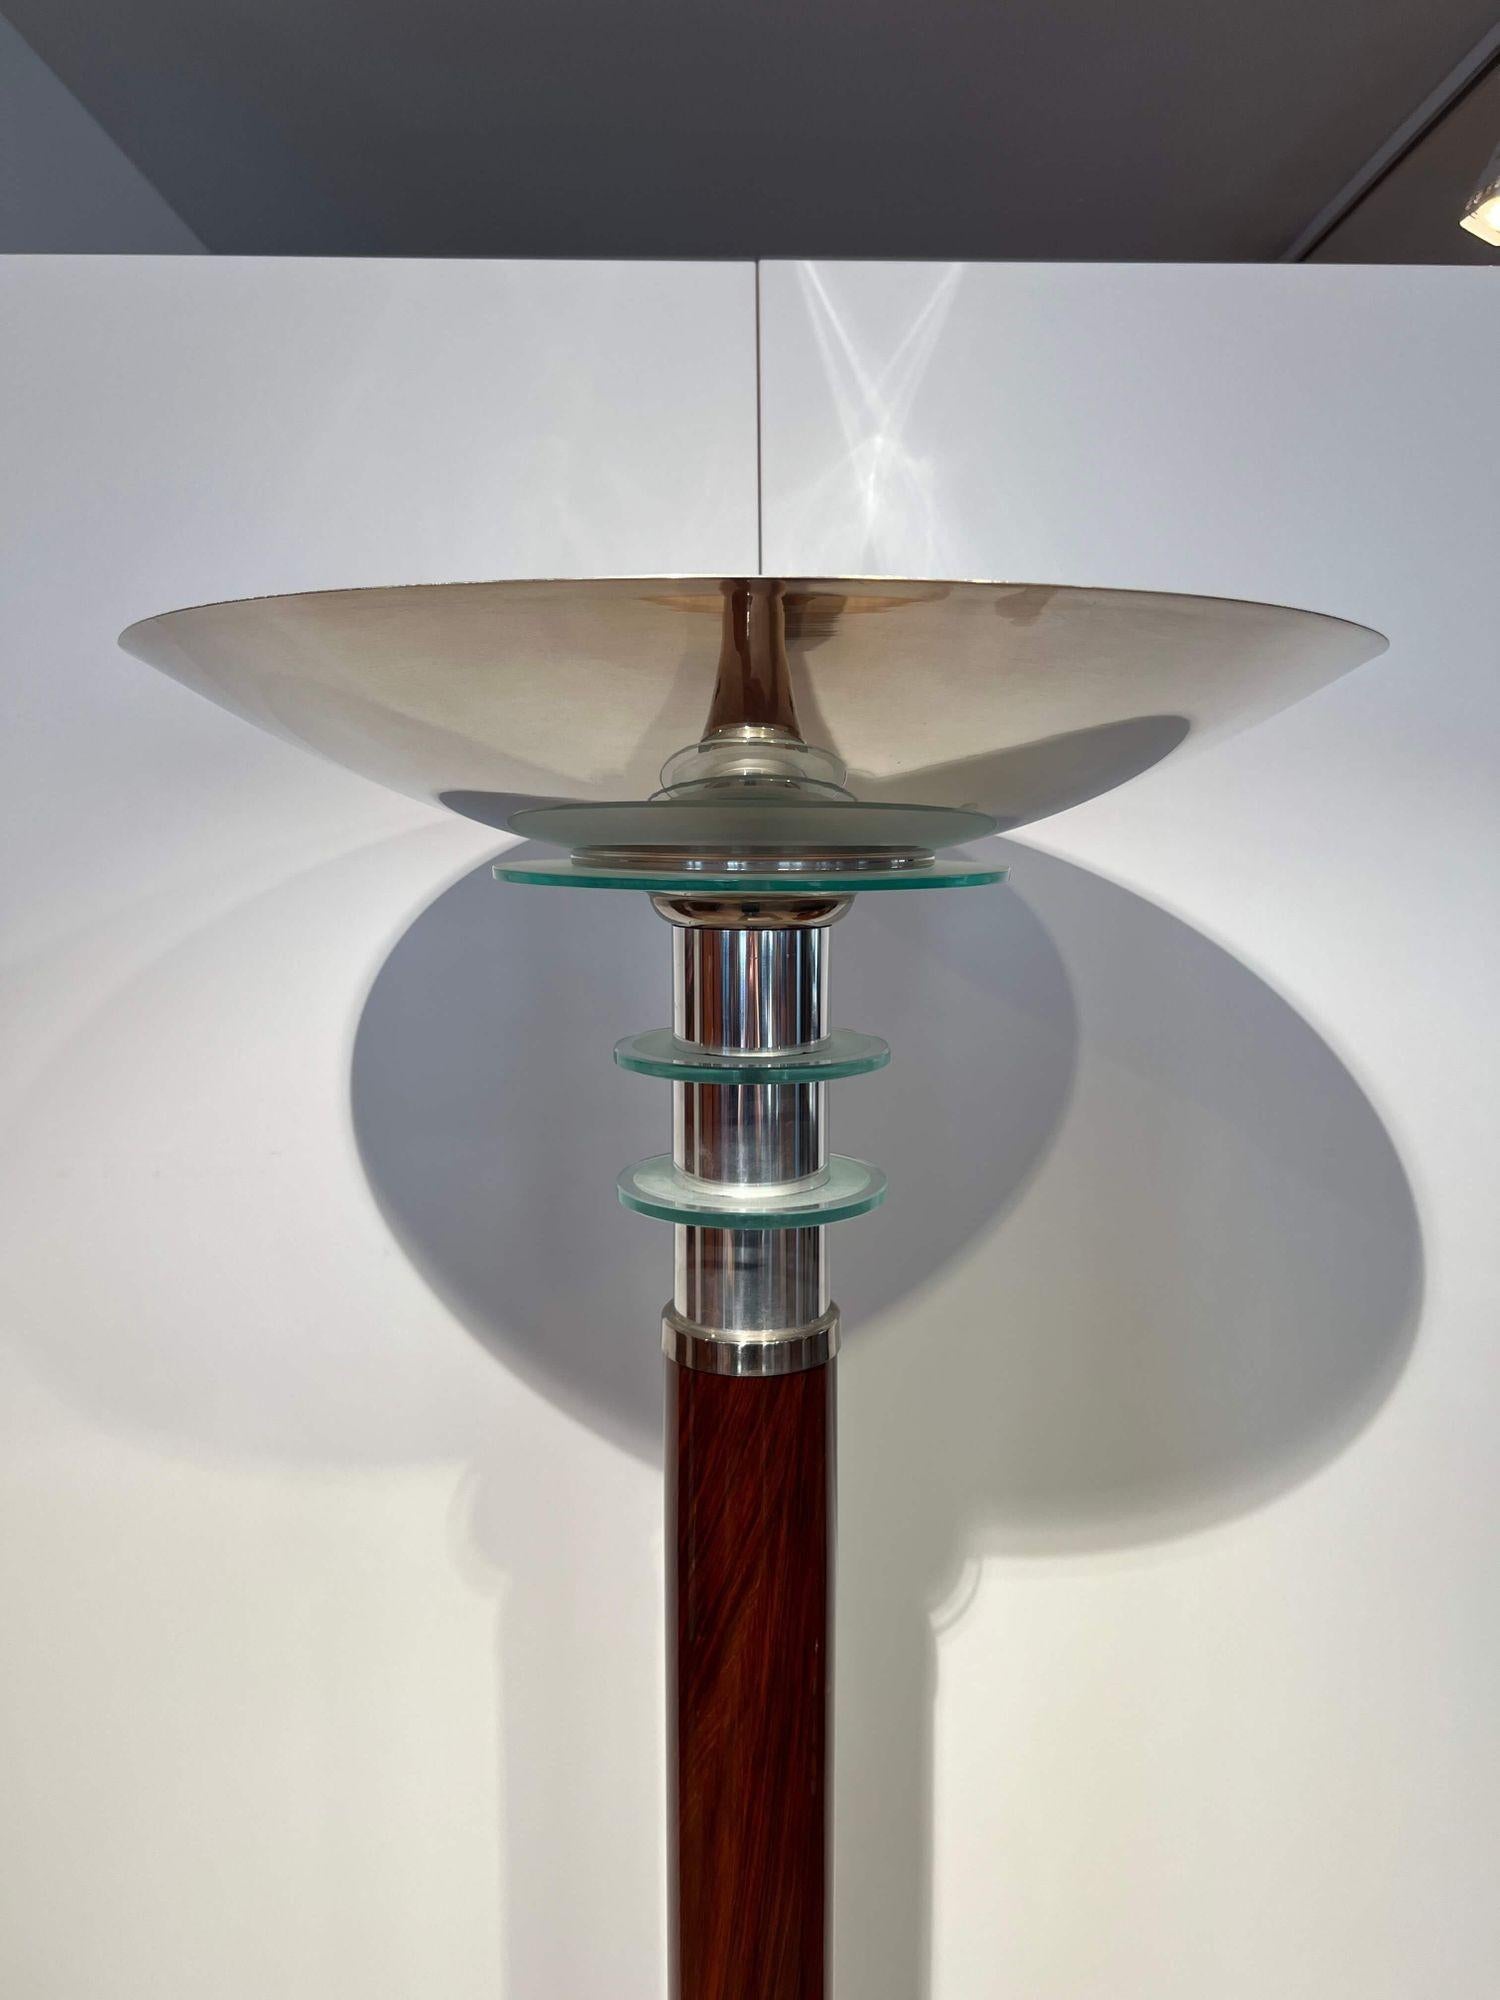 Art Deco Floor Lamp with Side Table, Walnut and Chrome, France, circa 1930 For Sale 8